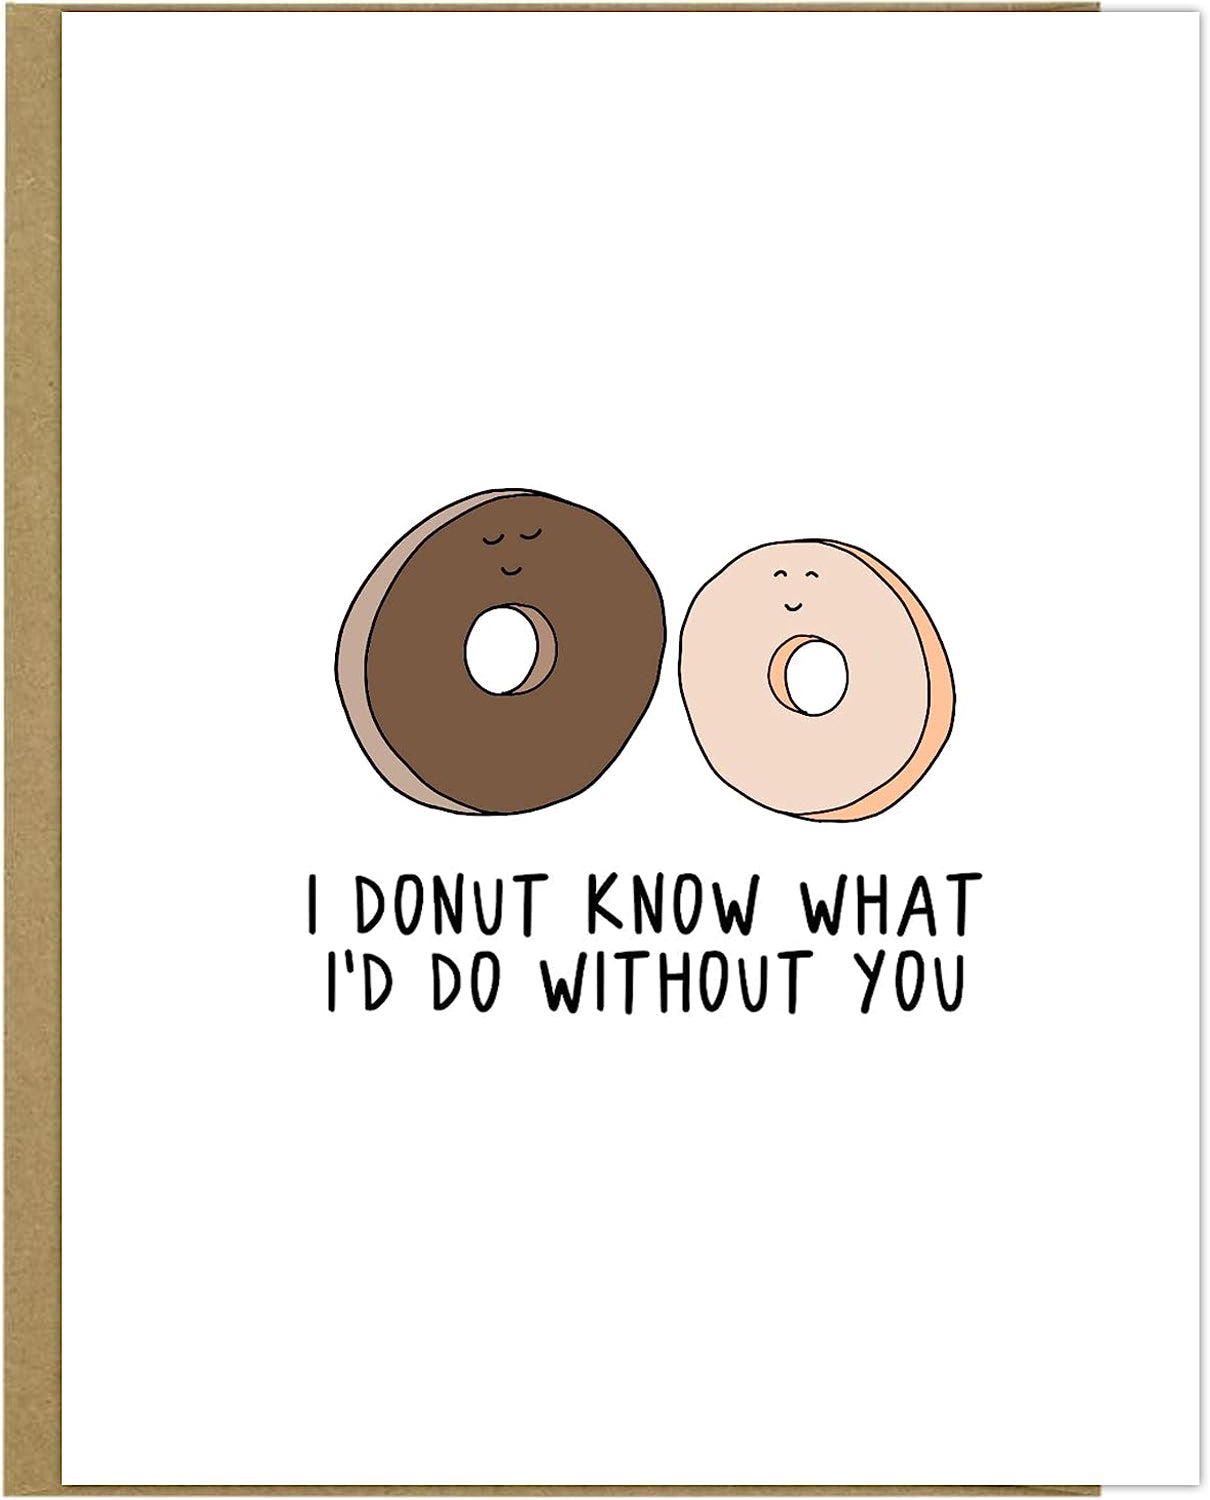 I Doughnut Know What I'd Do Without You Card – rockdoodles